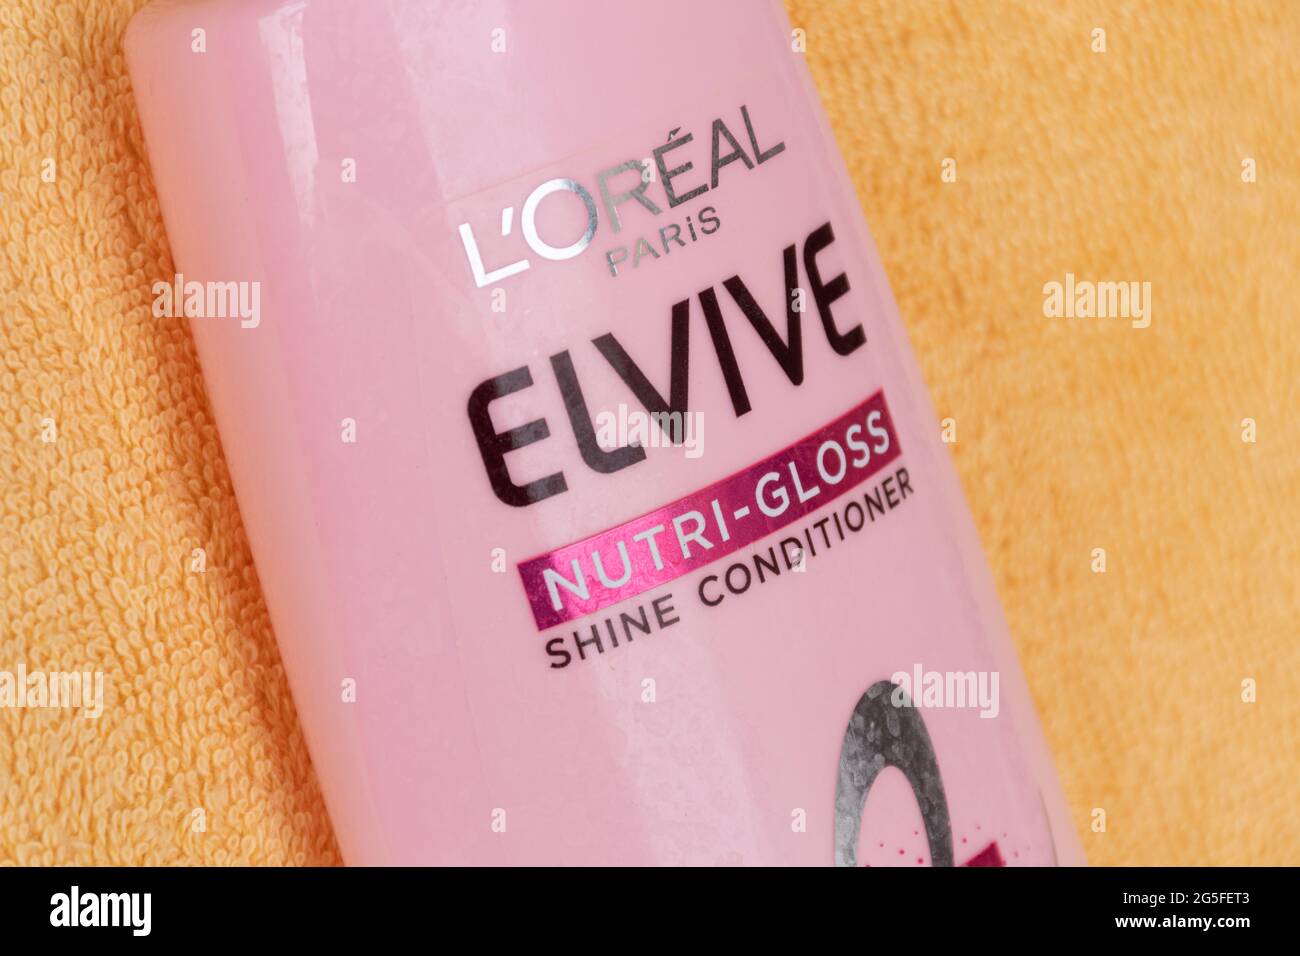 L'Oreal Elvive conditioner, hair product, pink bottle Stock Photo